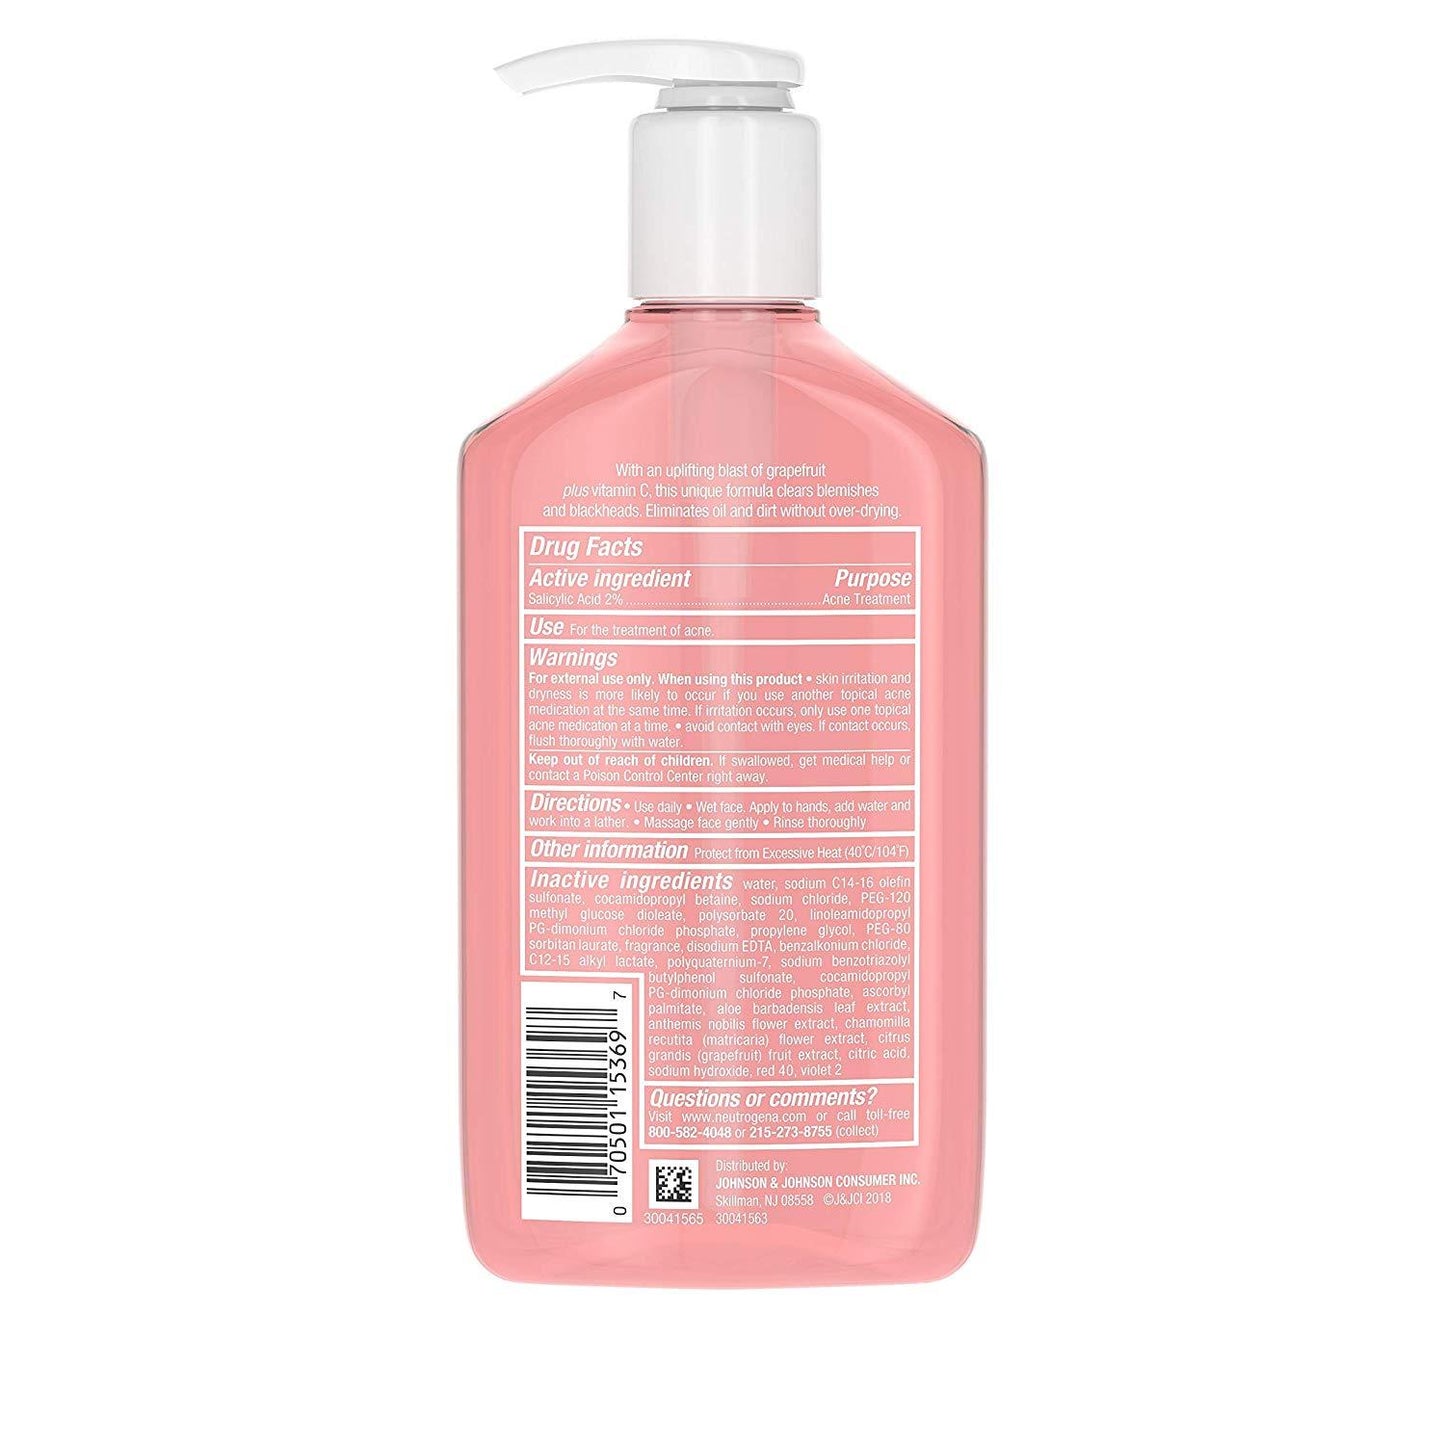 Neutrogena Oil-free Salicylic Acid Pink Grapefruit Pore Cleansing Acne Wash and Facial Cleanser 9.1 oz (269 ml)